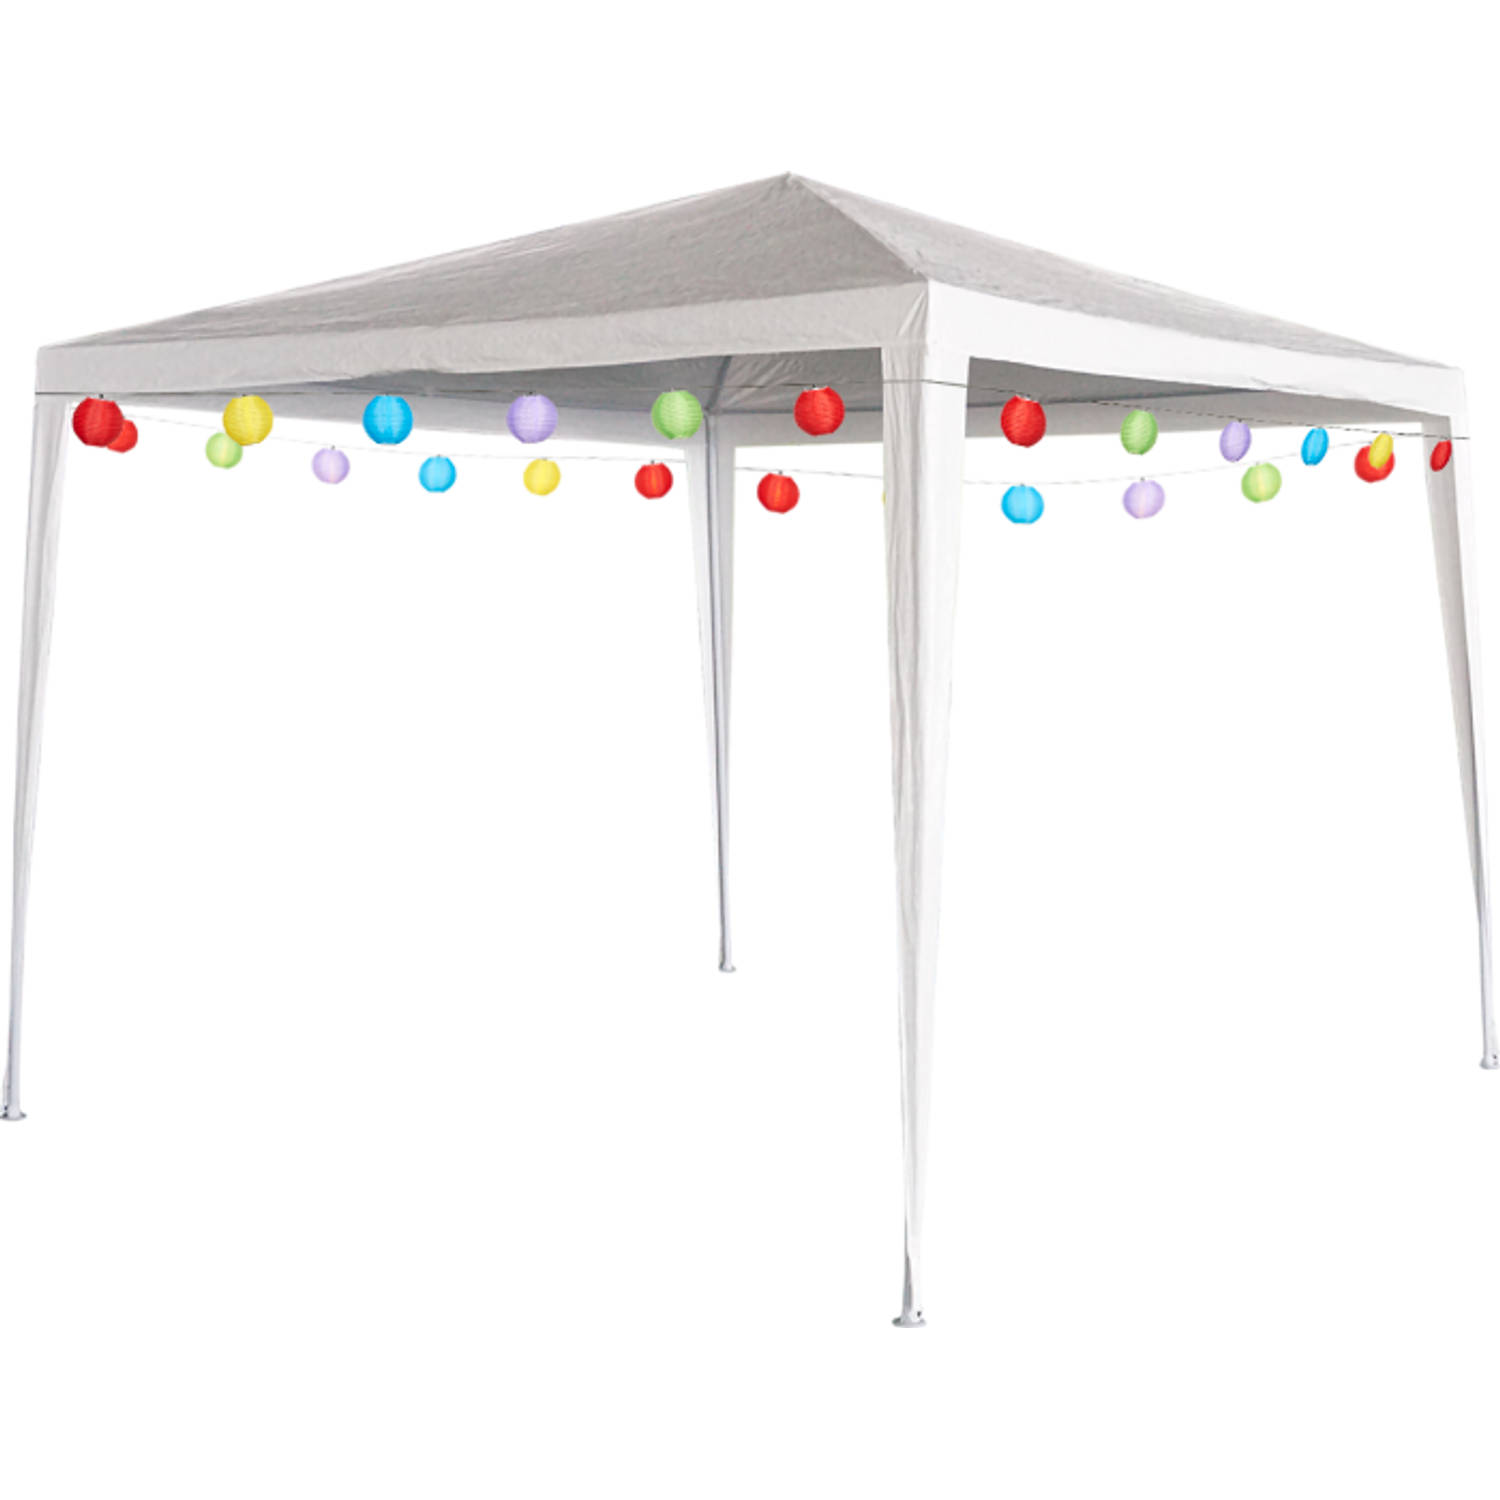 Royal Patio partytent - wit |